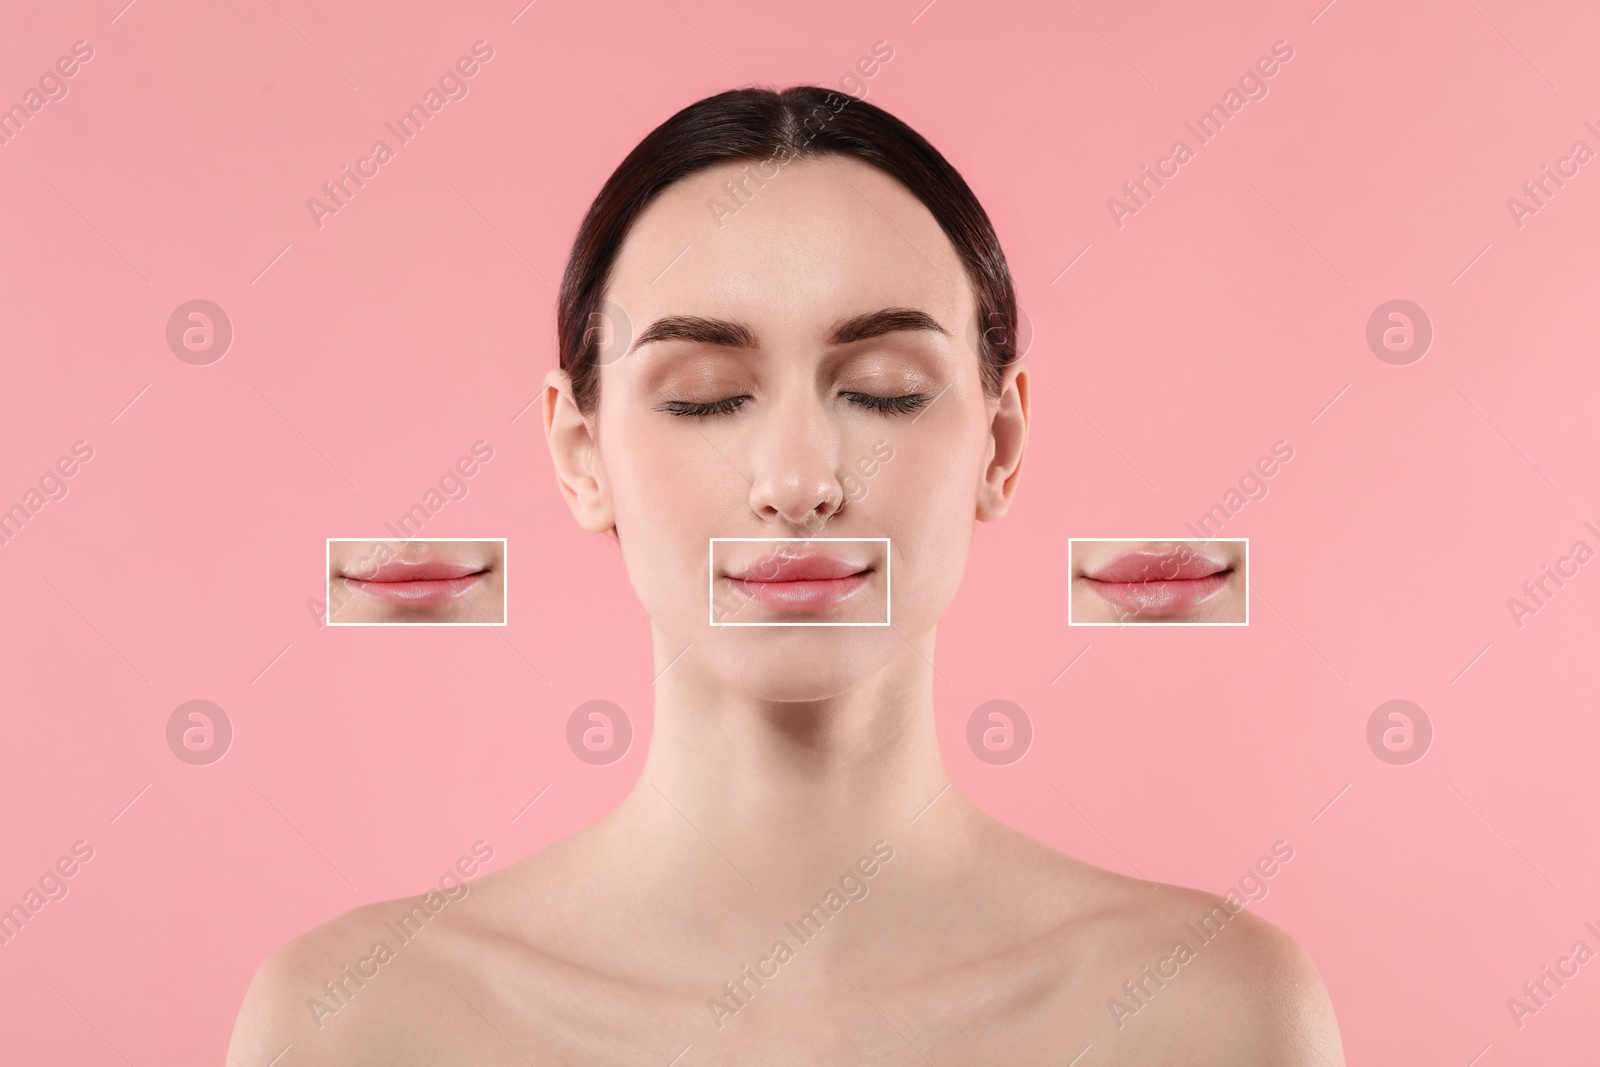 Image of Attractive woman with beautiful lips on pink background. Zoomed areas showing difference in lip fullness due to cosmetic procedure